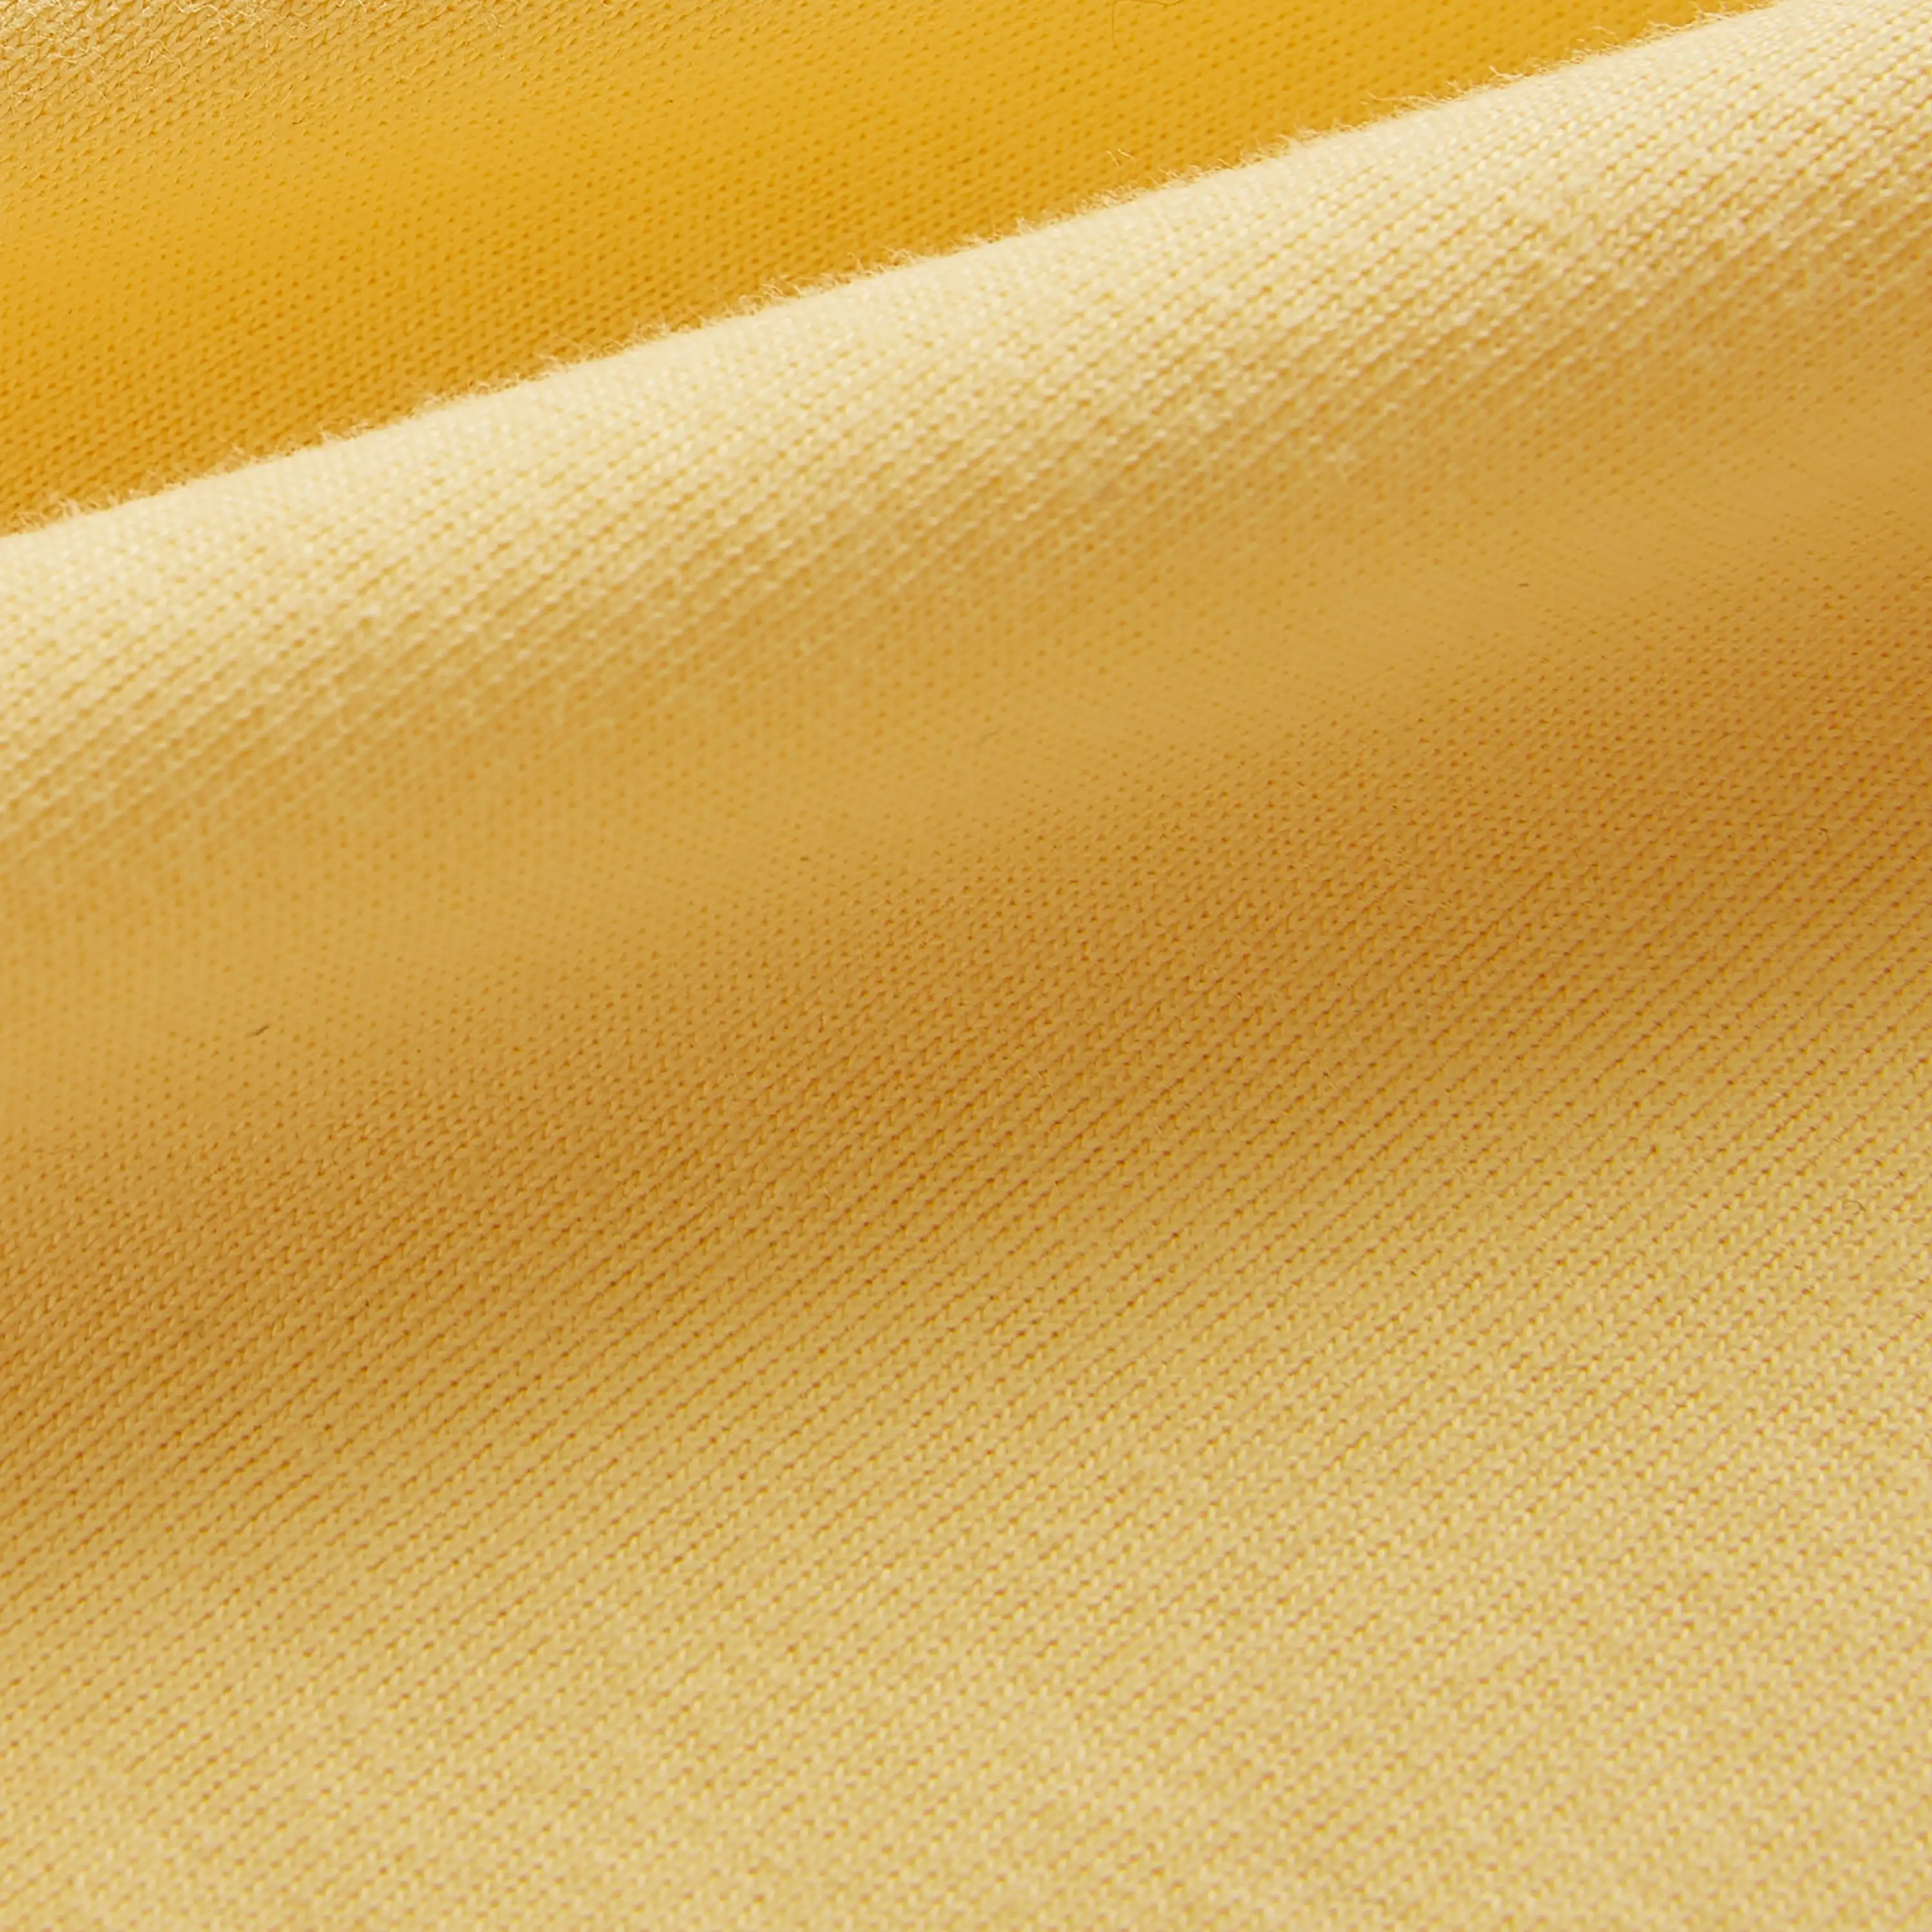 Cotton Polyester Fabric Factory Price 78% Cotton 22% Polyester 180 GSM Knitted Jersey CVC Fabric For T-shirt